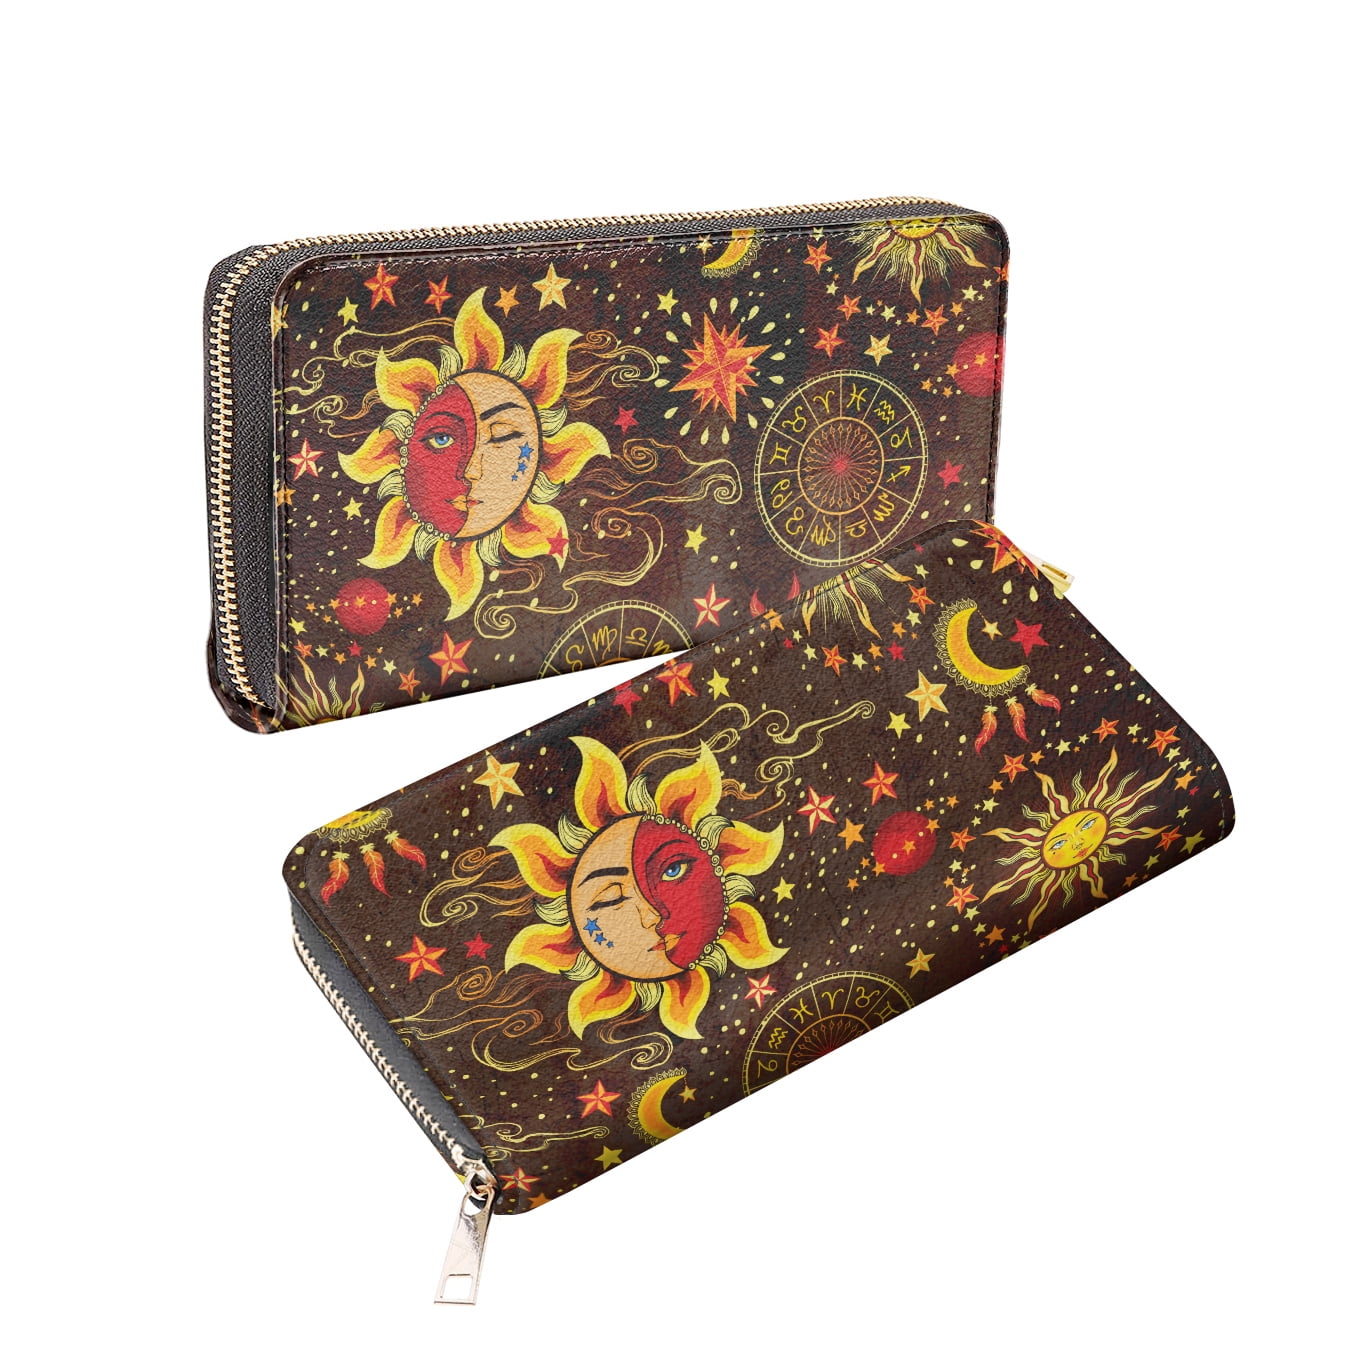 All-in-One Faux Leather Long Zippered Clutch in Fun and Unique Prints Spider Web Wallet 